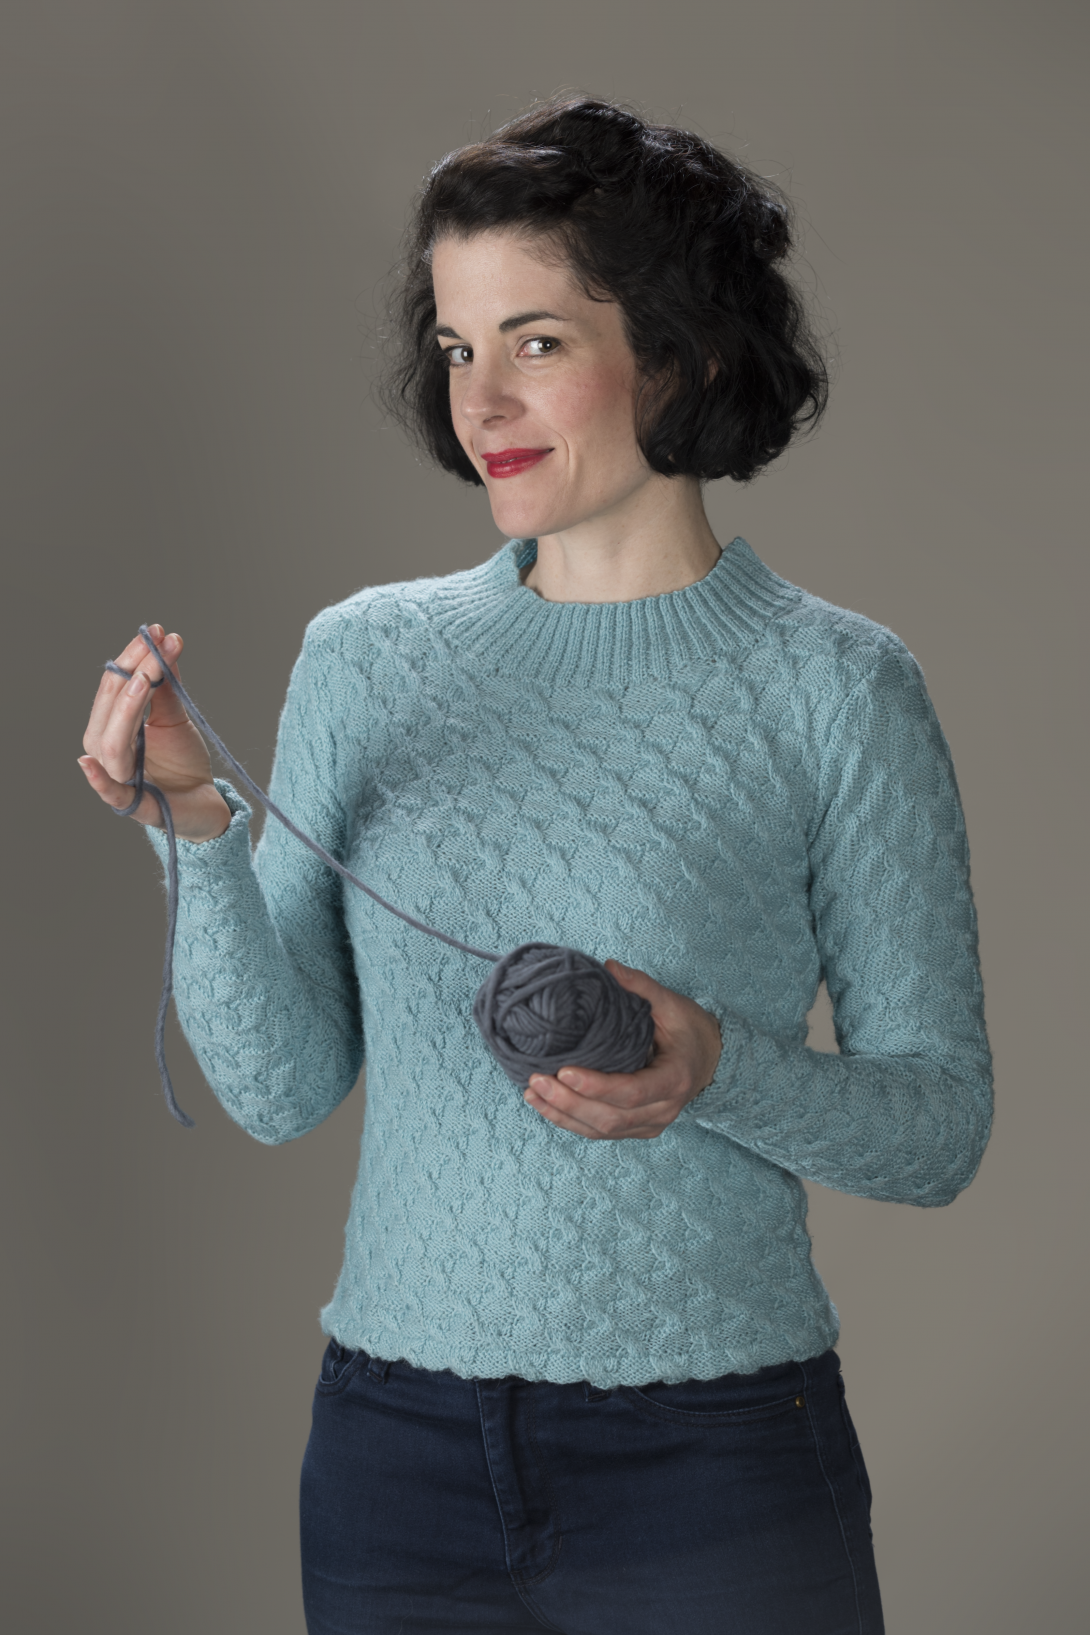 A woman in a light blue knitted jumper holds a ball of yarn in her left hand, with a loose thread held in the right.